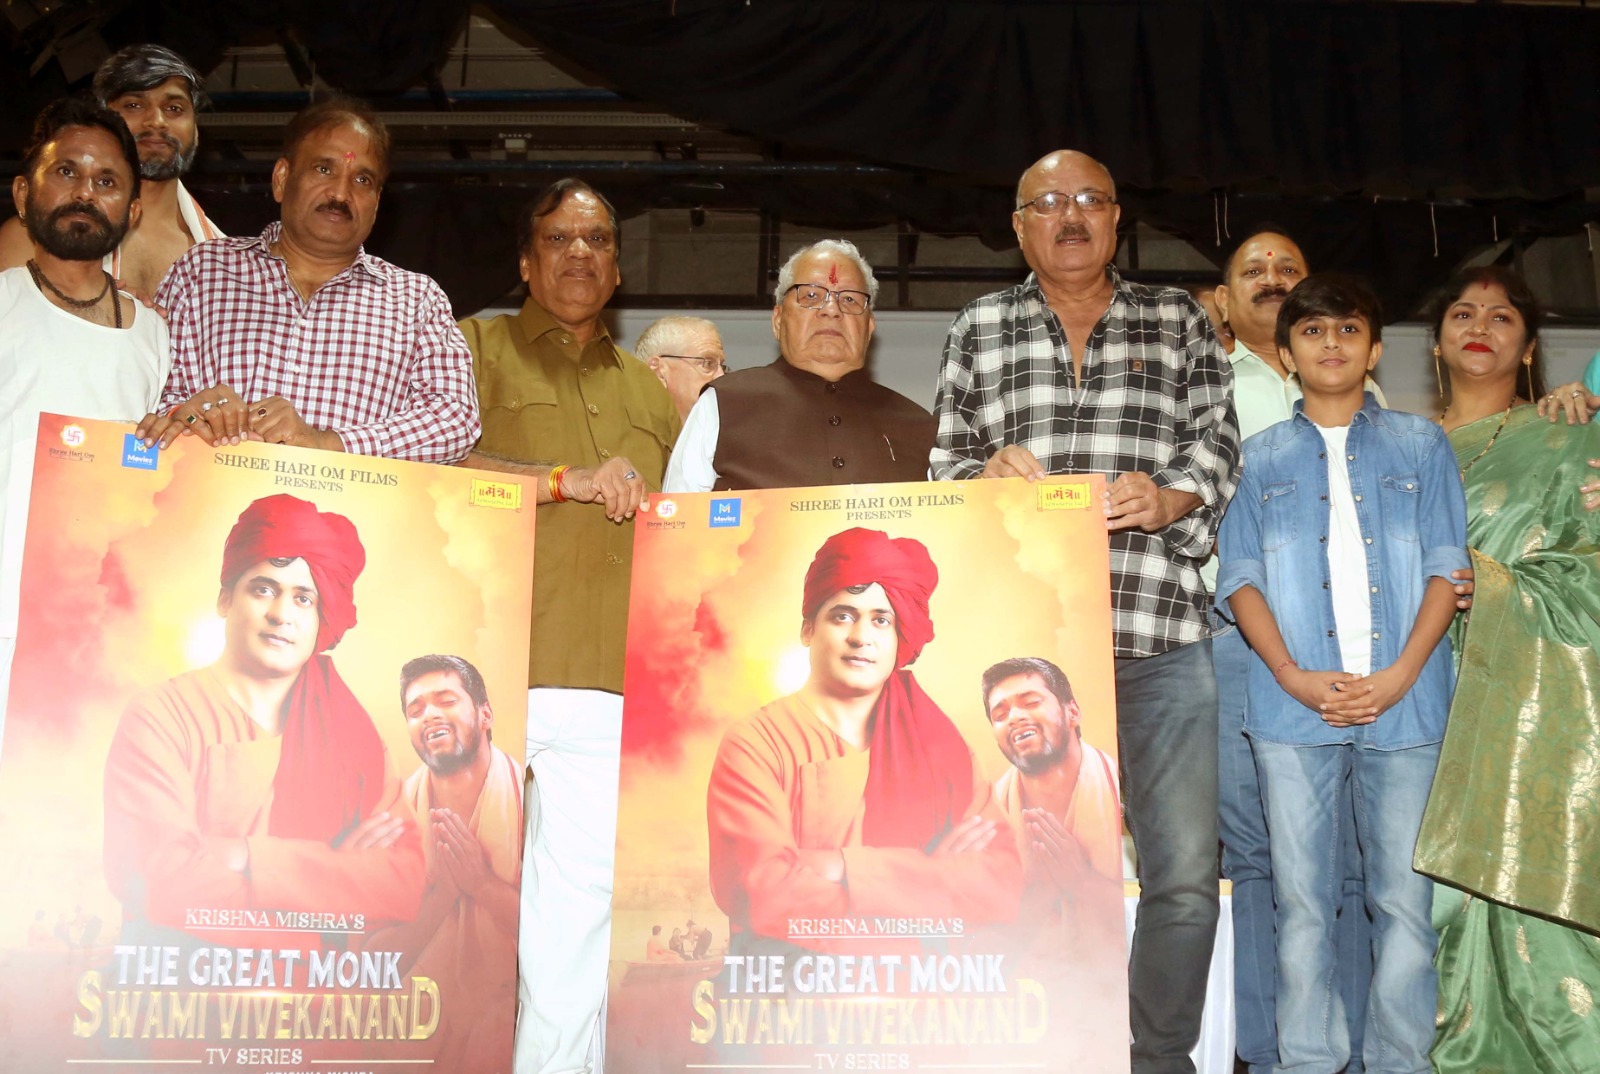 Rajasthan Governor Kalraj Mishra inaugurated the poster of the TV serial being made on Swami Vivekananda.